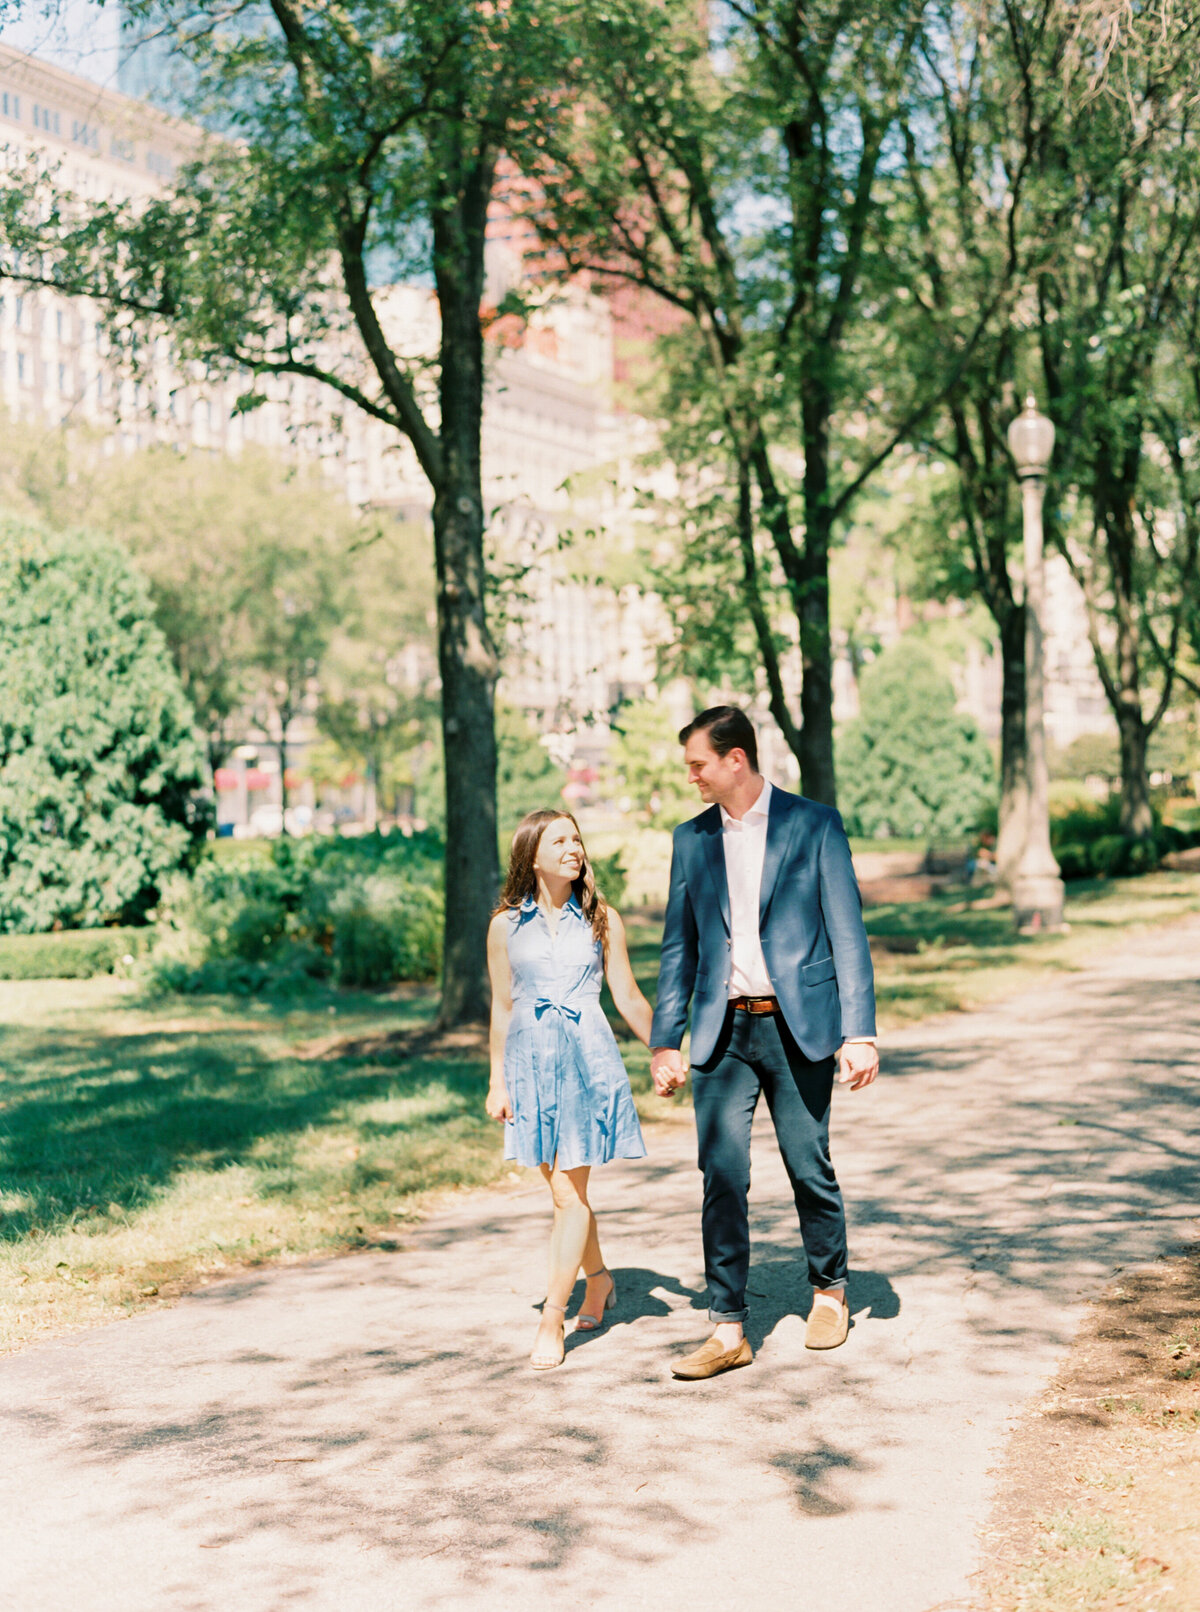 Tiffaney Childs Photography-Chicago Wedding Photographer-Cale & Henry-Chicago Engagement Session-121